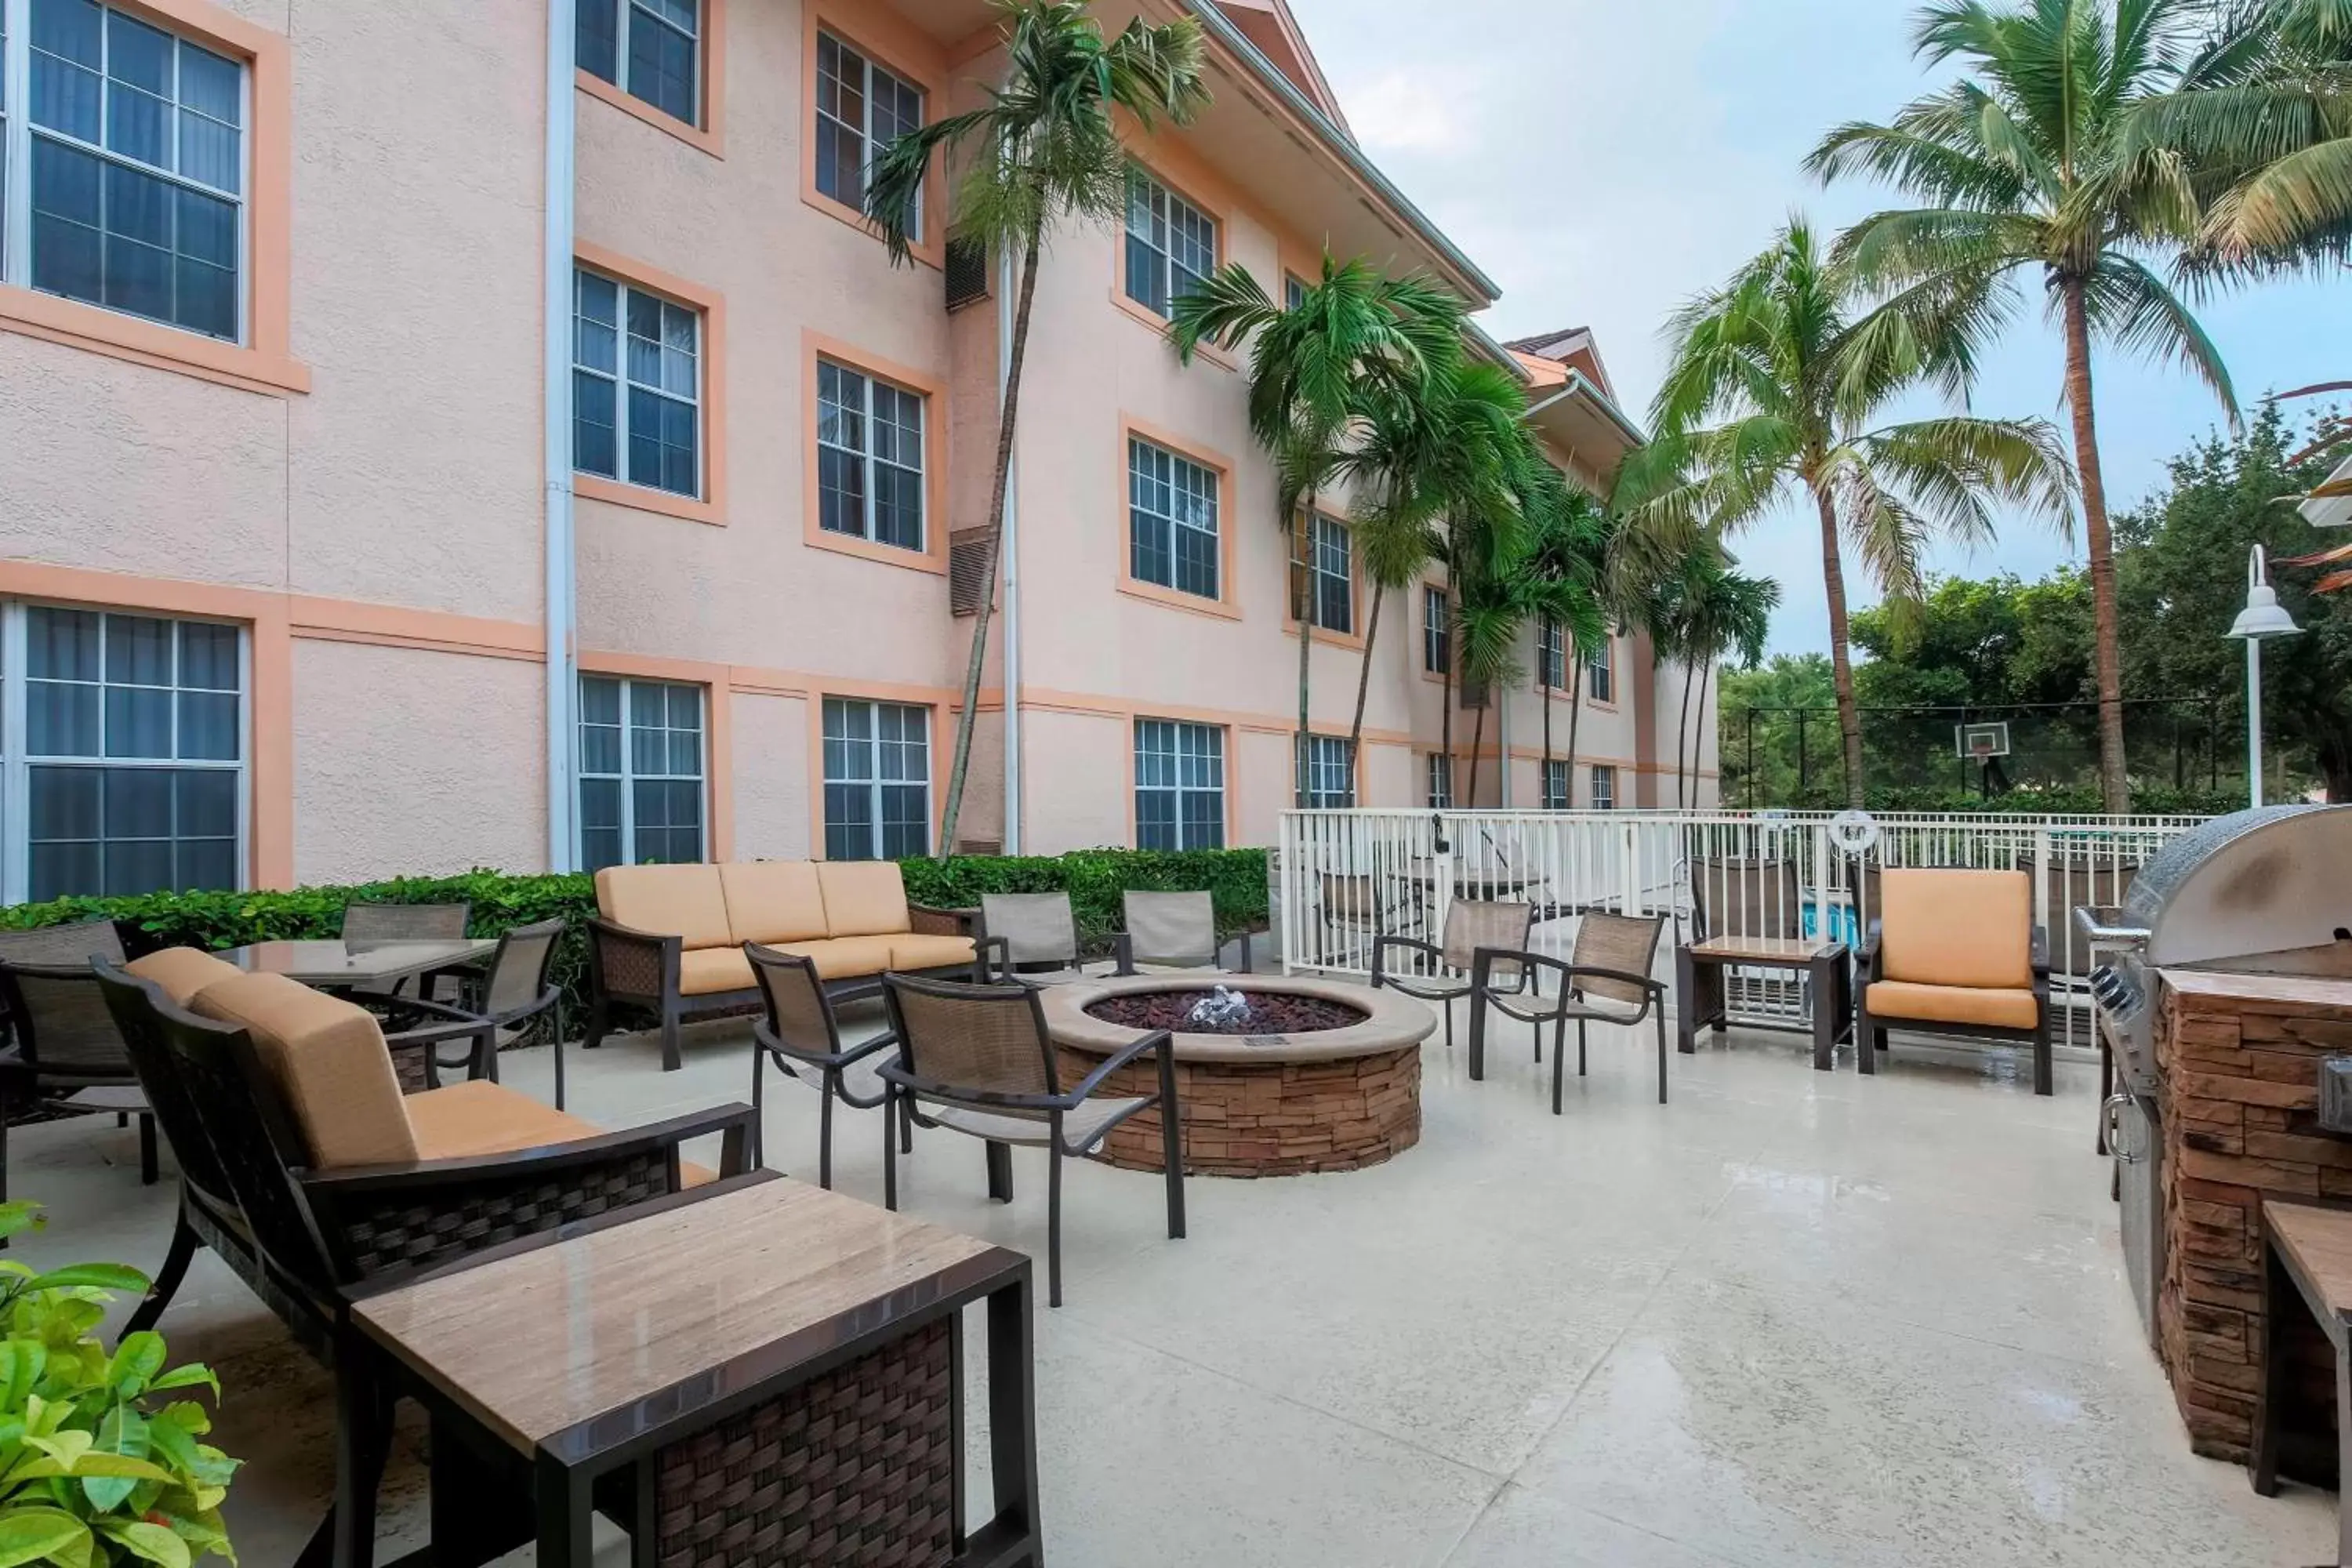 Property building in Residence Inn West Palm Beach